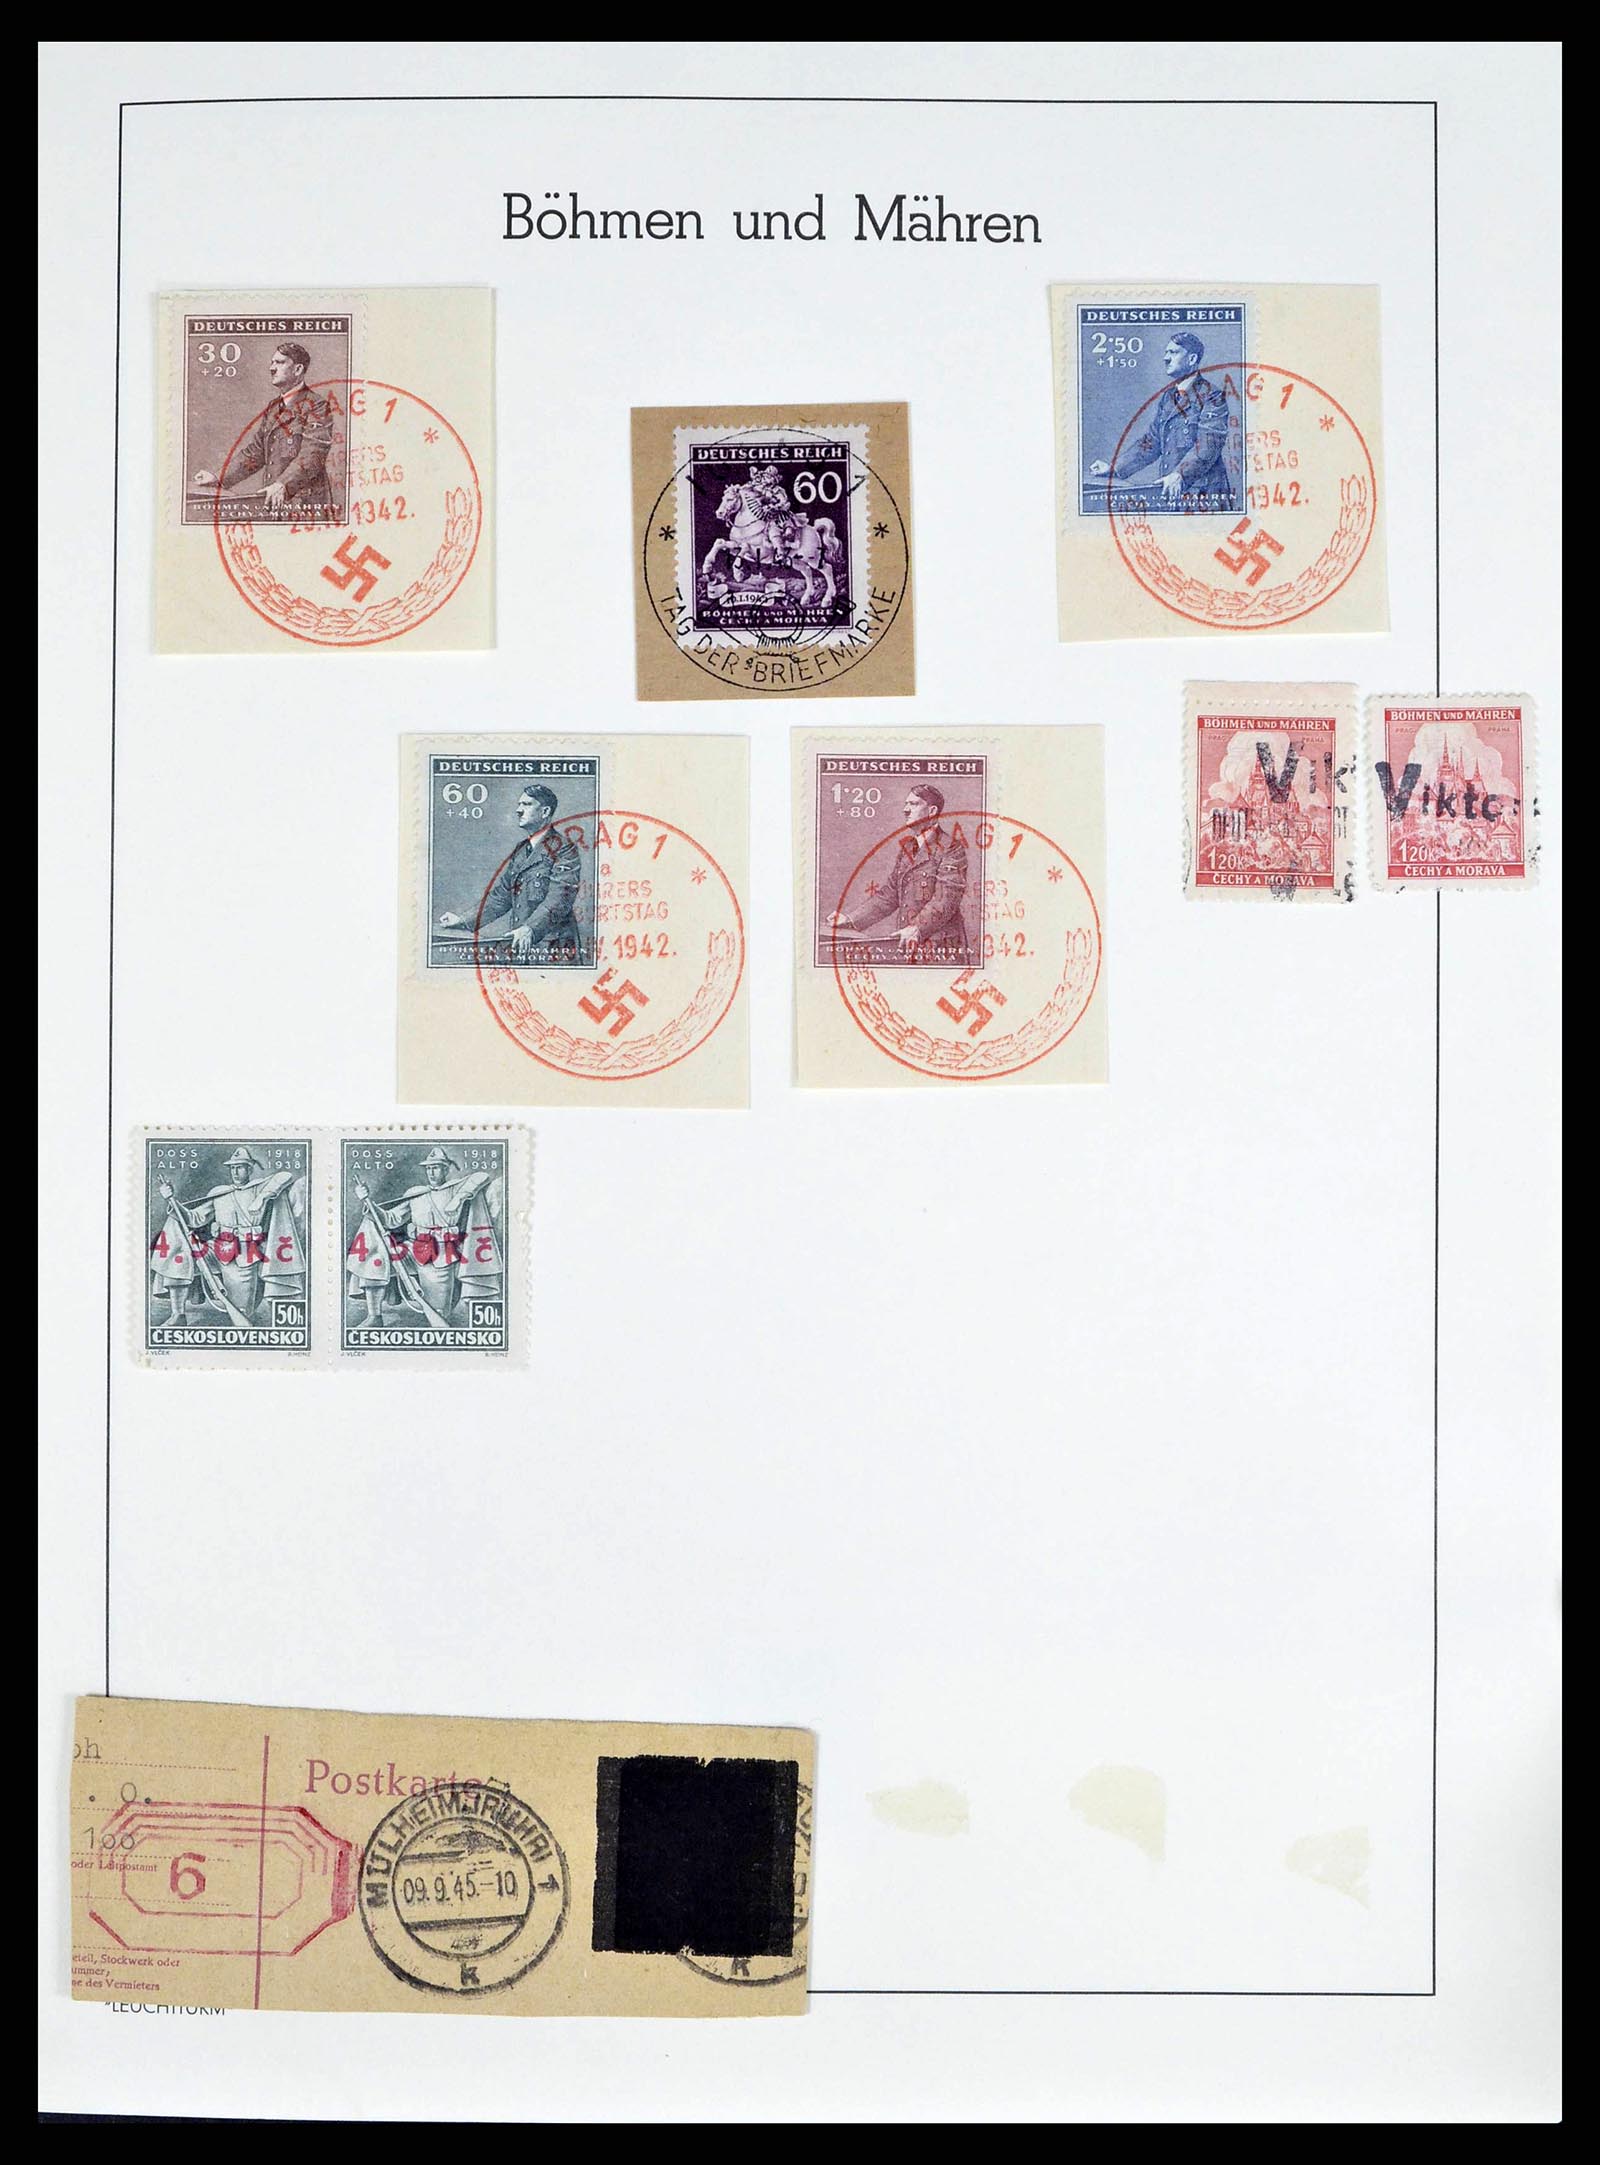 38501 0041 - Stamp collection 38501 German territories and occupations 1920-1945.